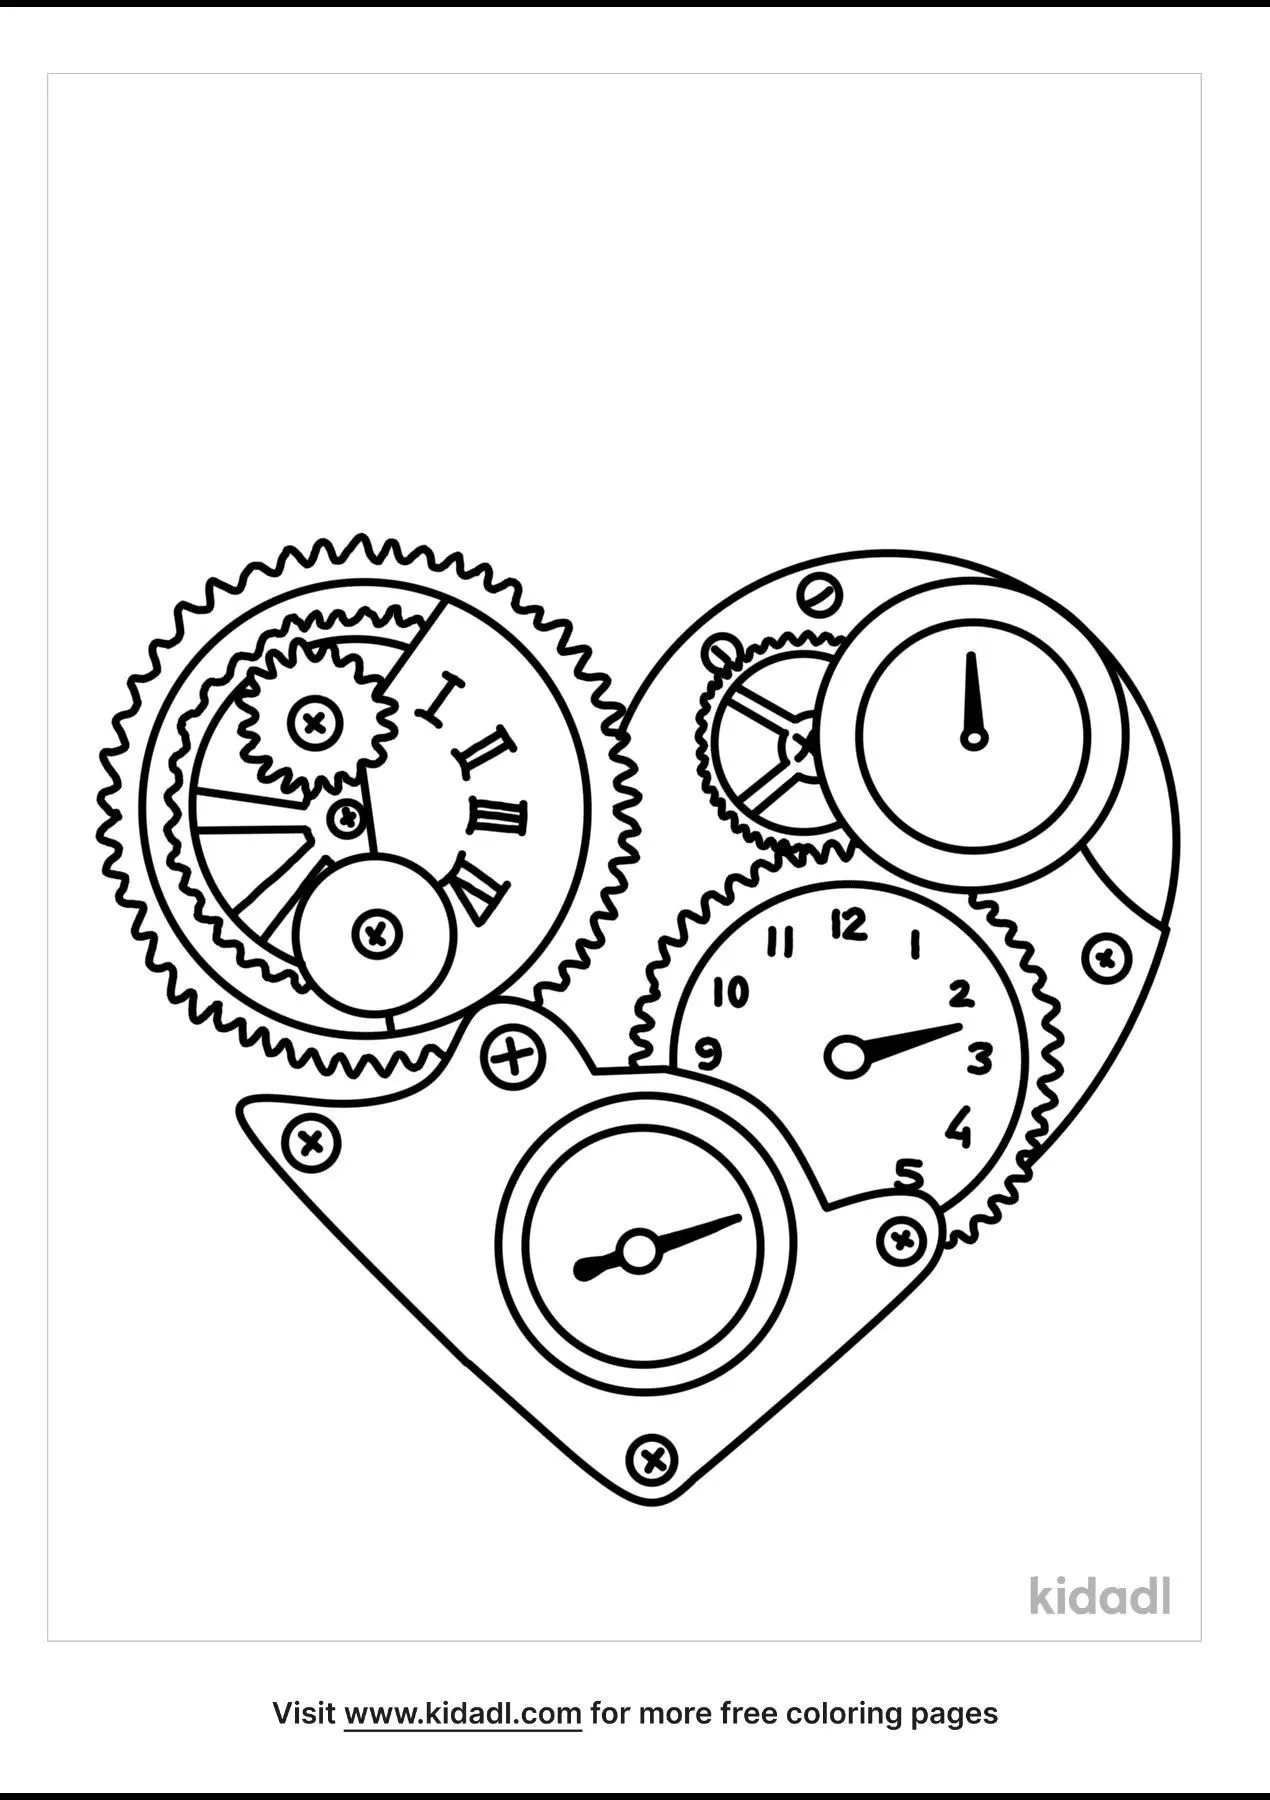 Free Steampunk Coloring Page | Coloring Page Printables | Kidadl